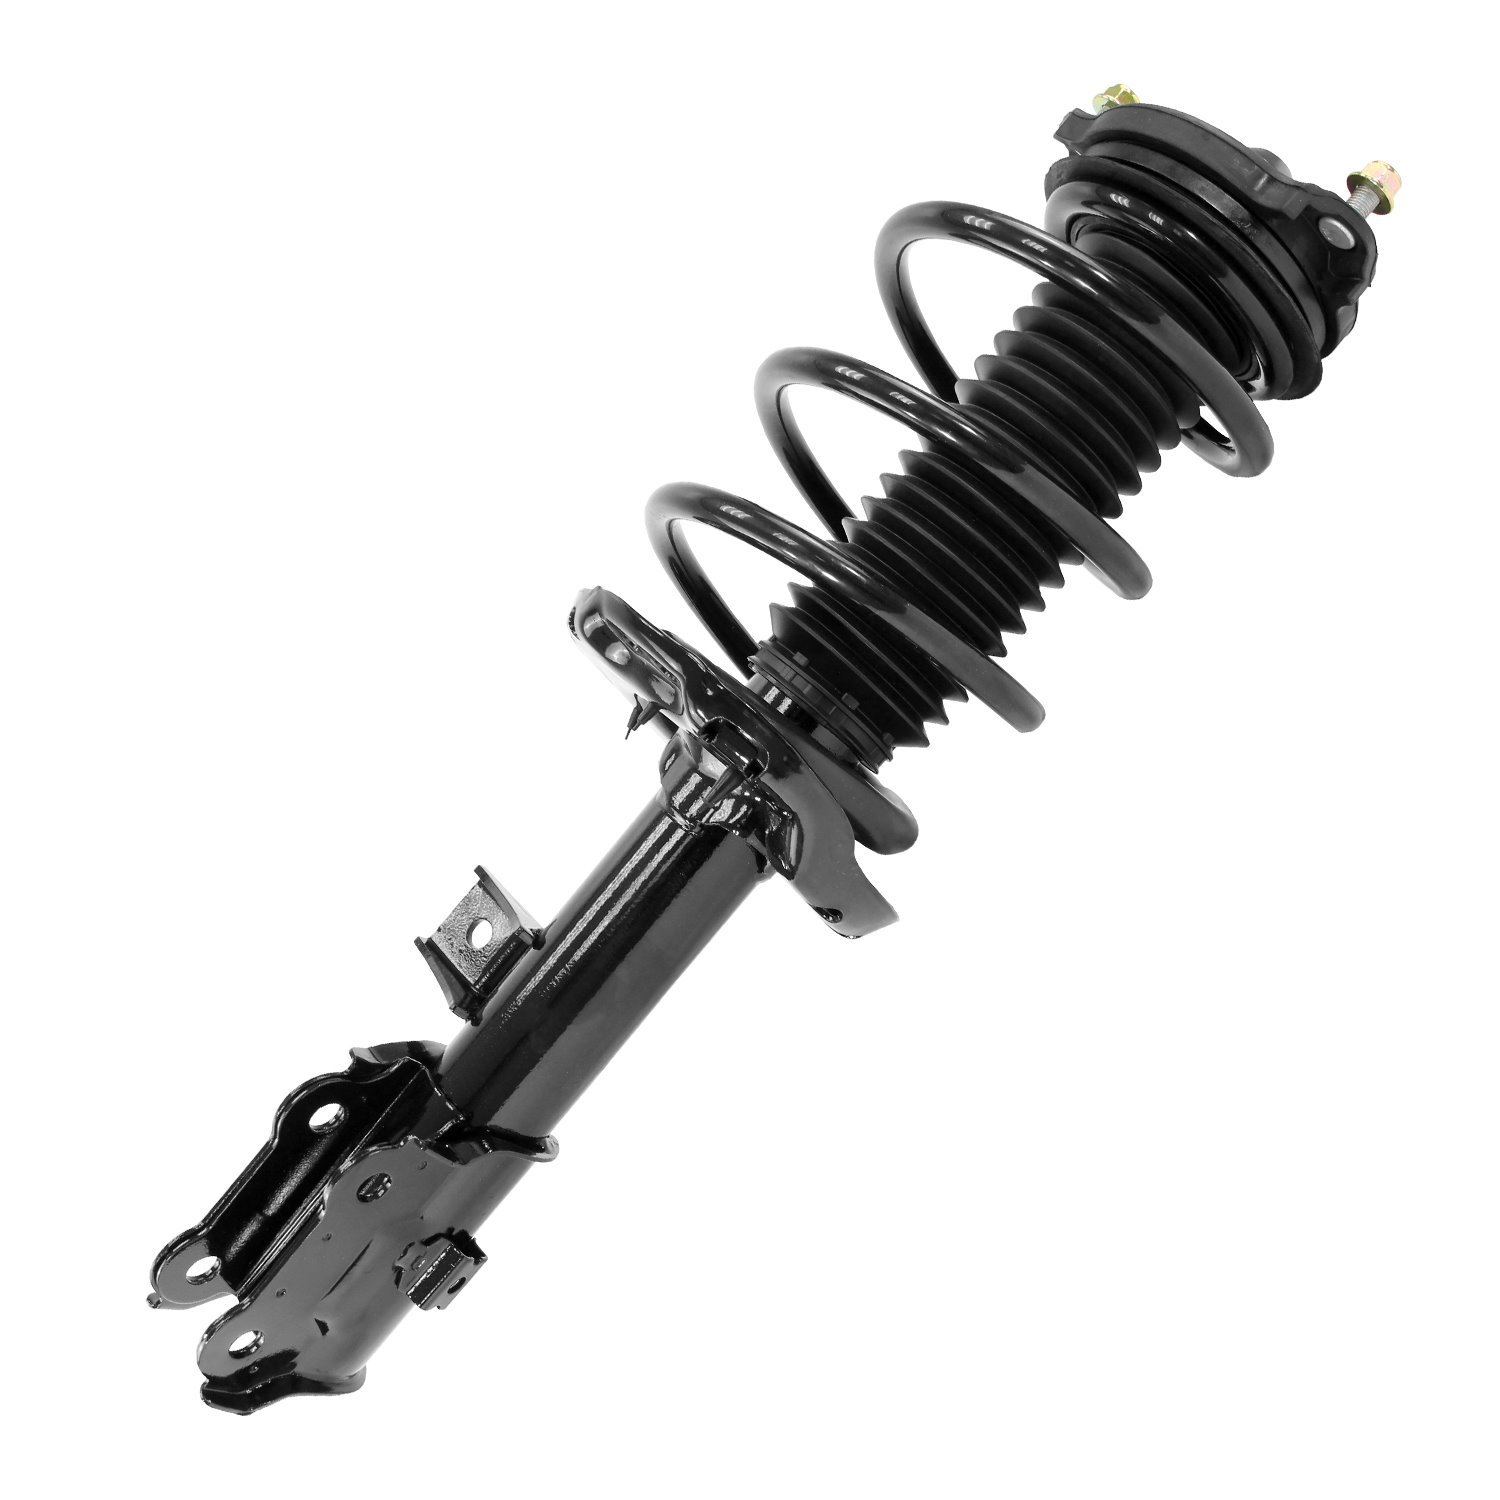 13013 Front Suspension Strut & Coil Spring Assemby Fits Select Kia Sportage, Hyundai Tucson